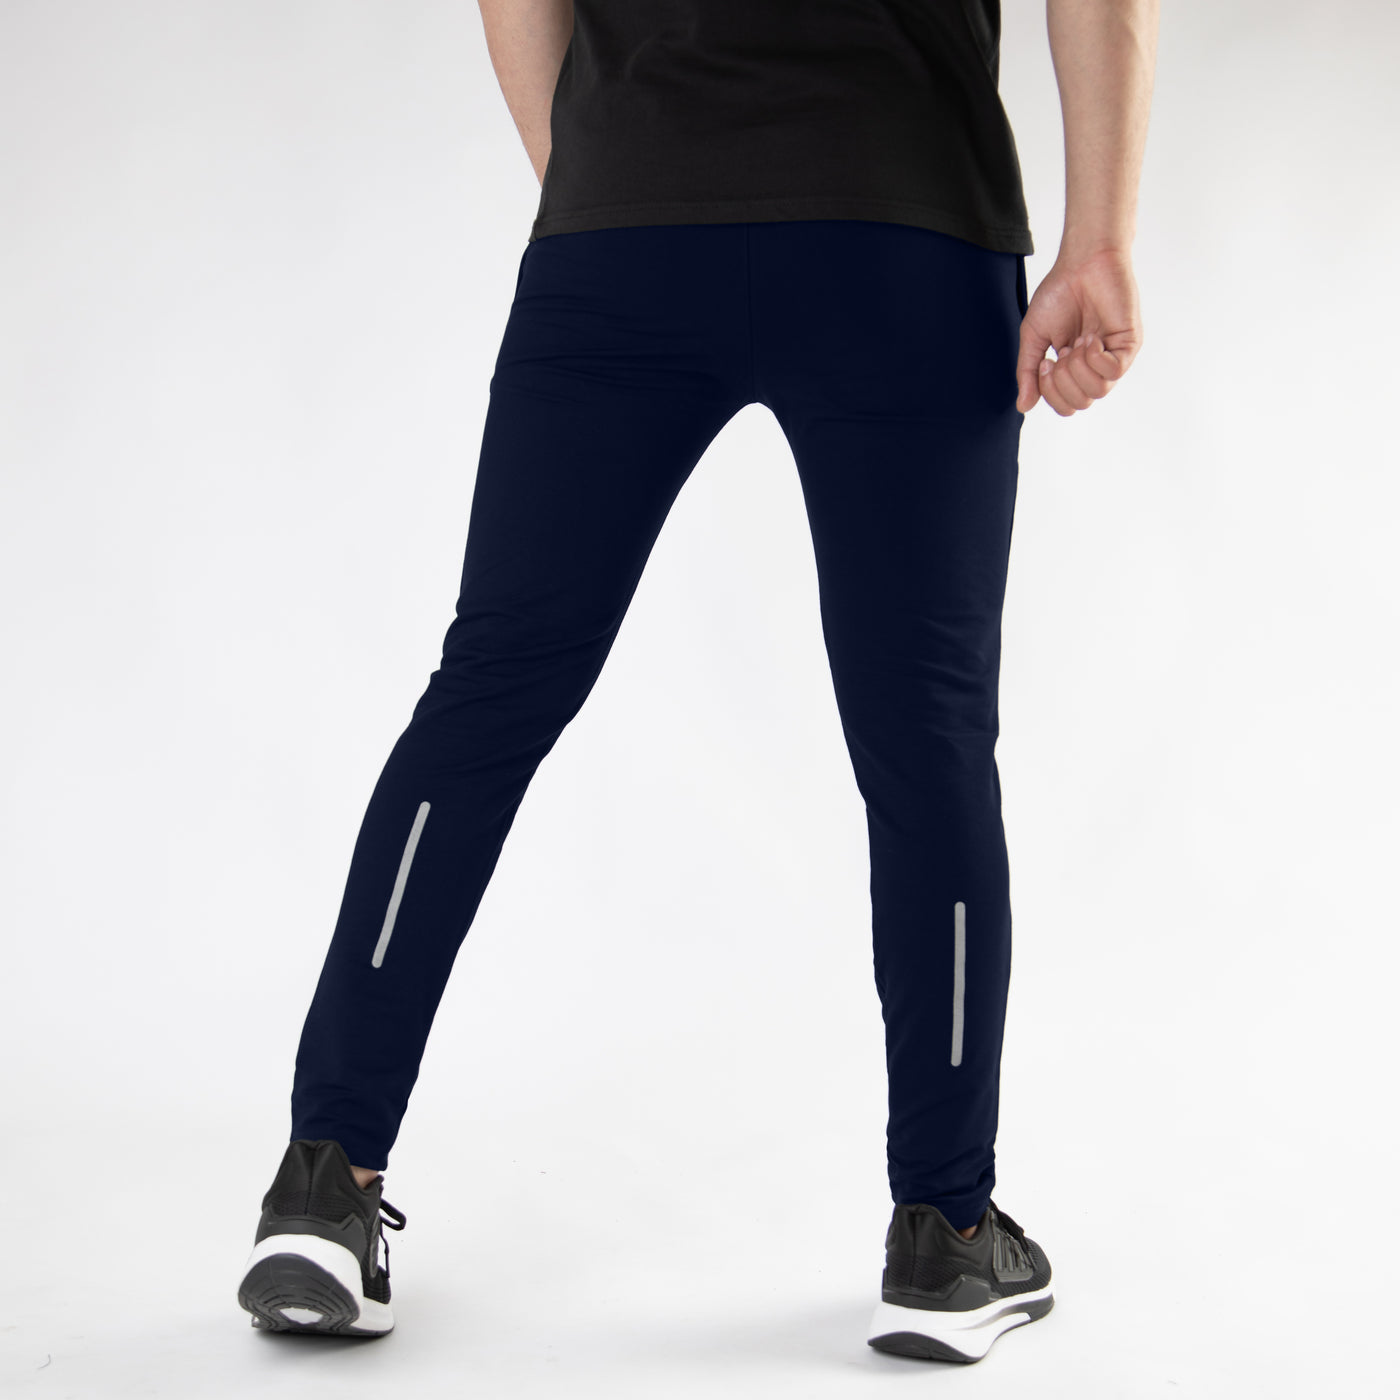 Premium Navy Lycra 4-Way Stretch Bottoms with Back Reflectors